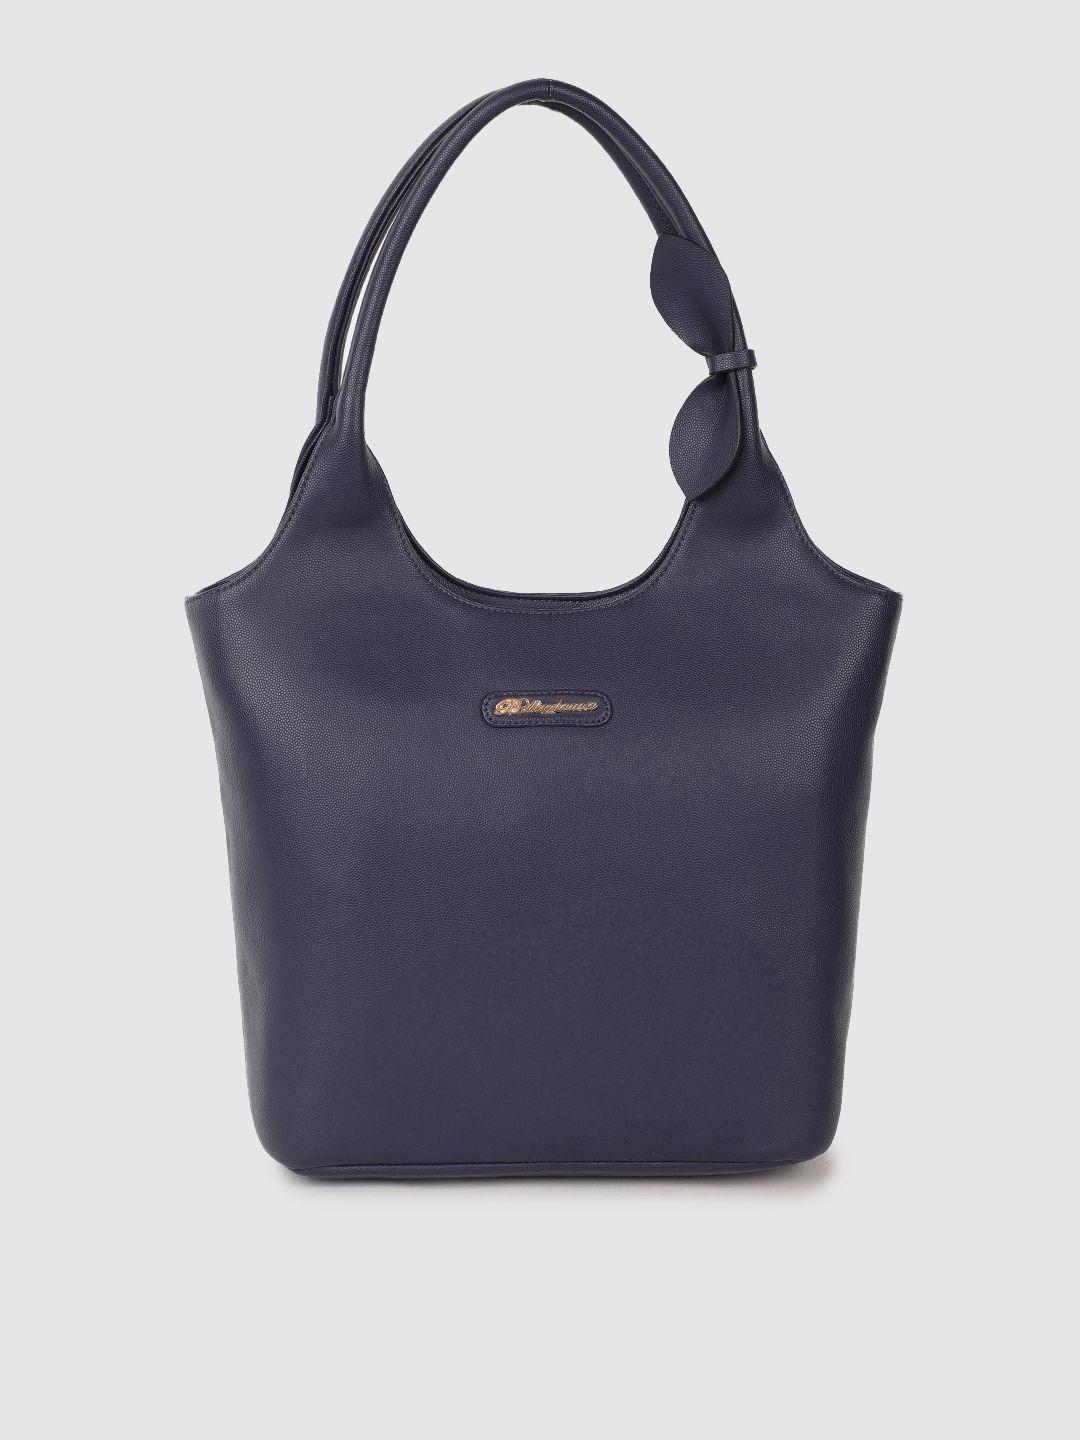 belladama navy blue structured hobo bag with bow detail